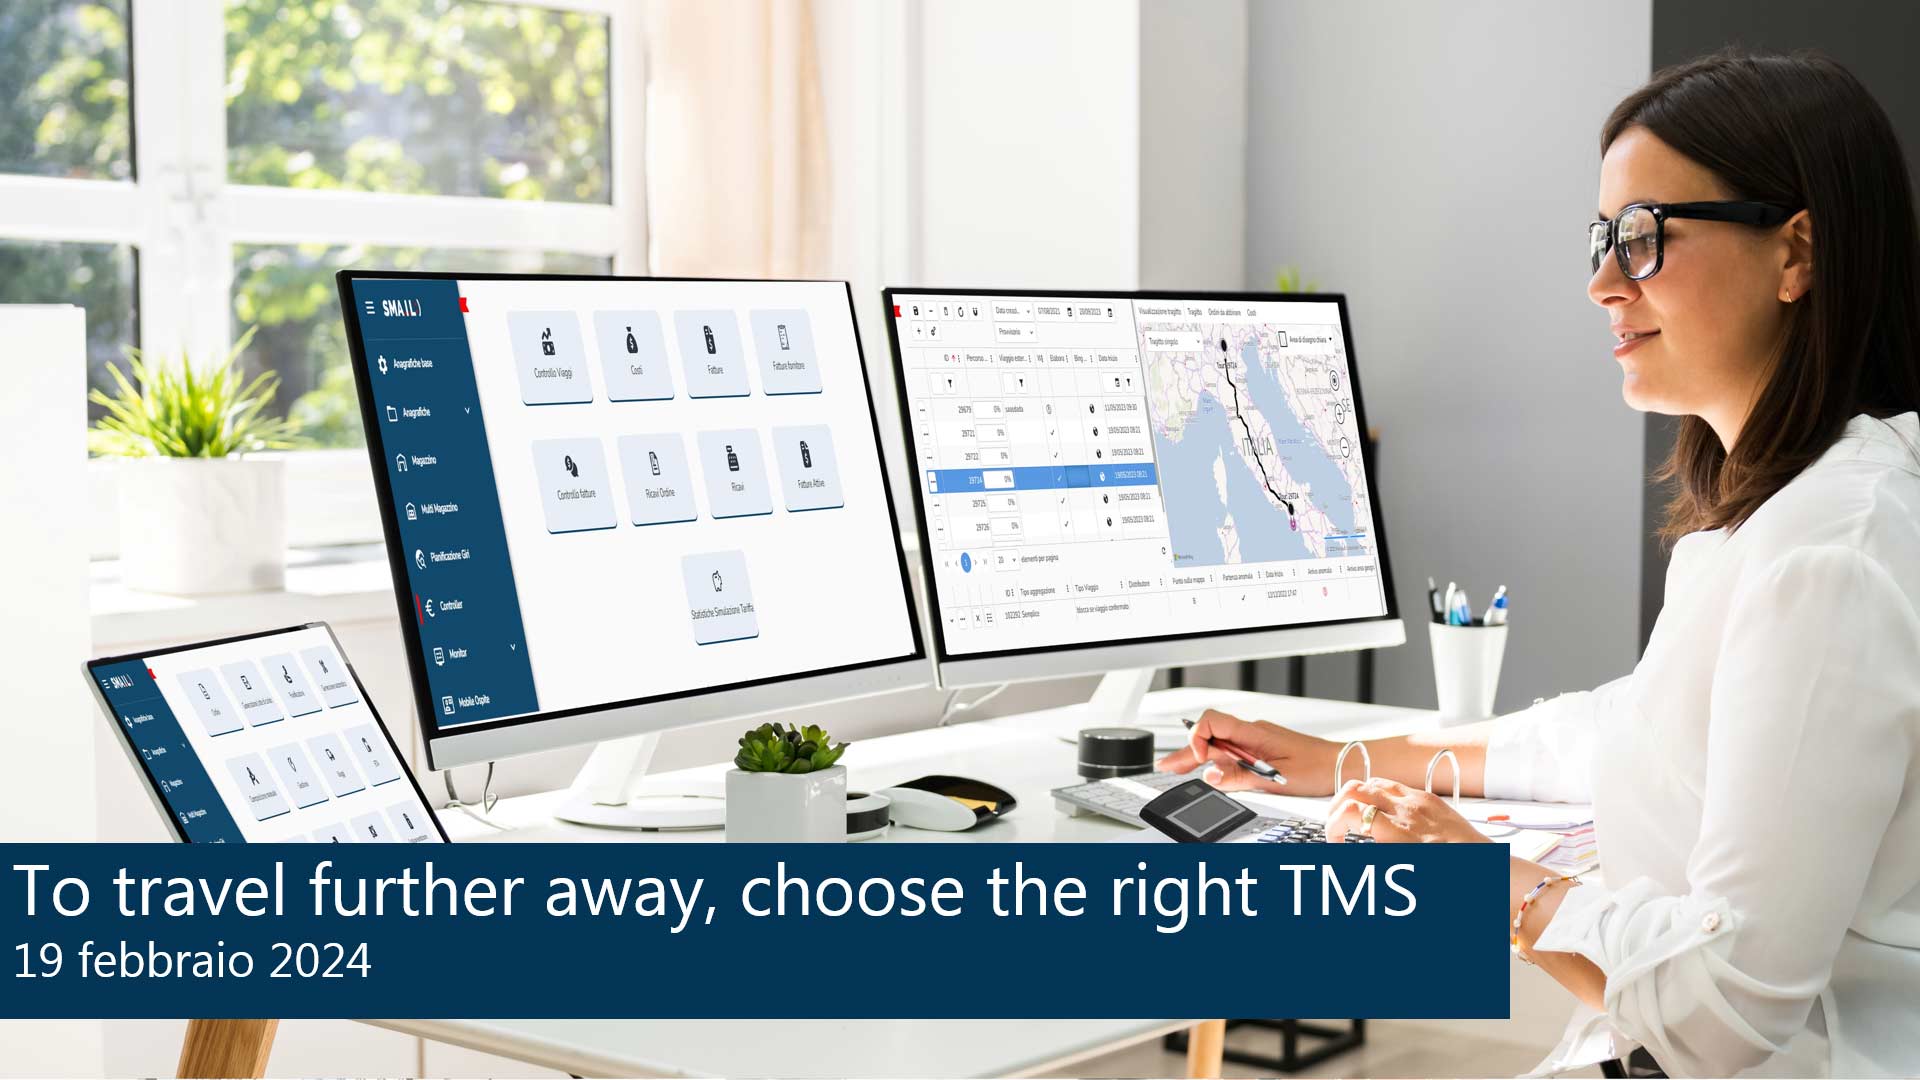 Digital event To travel further away, choose the right TMS